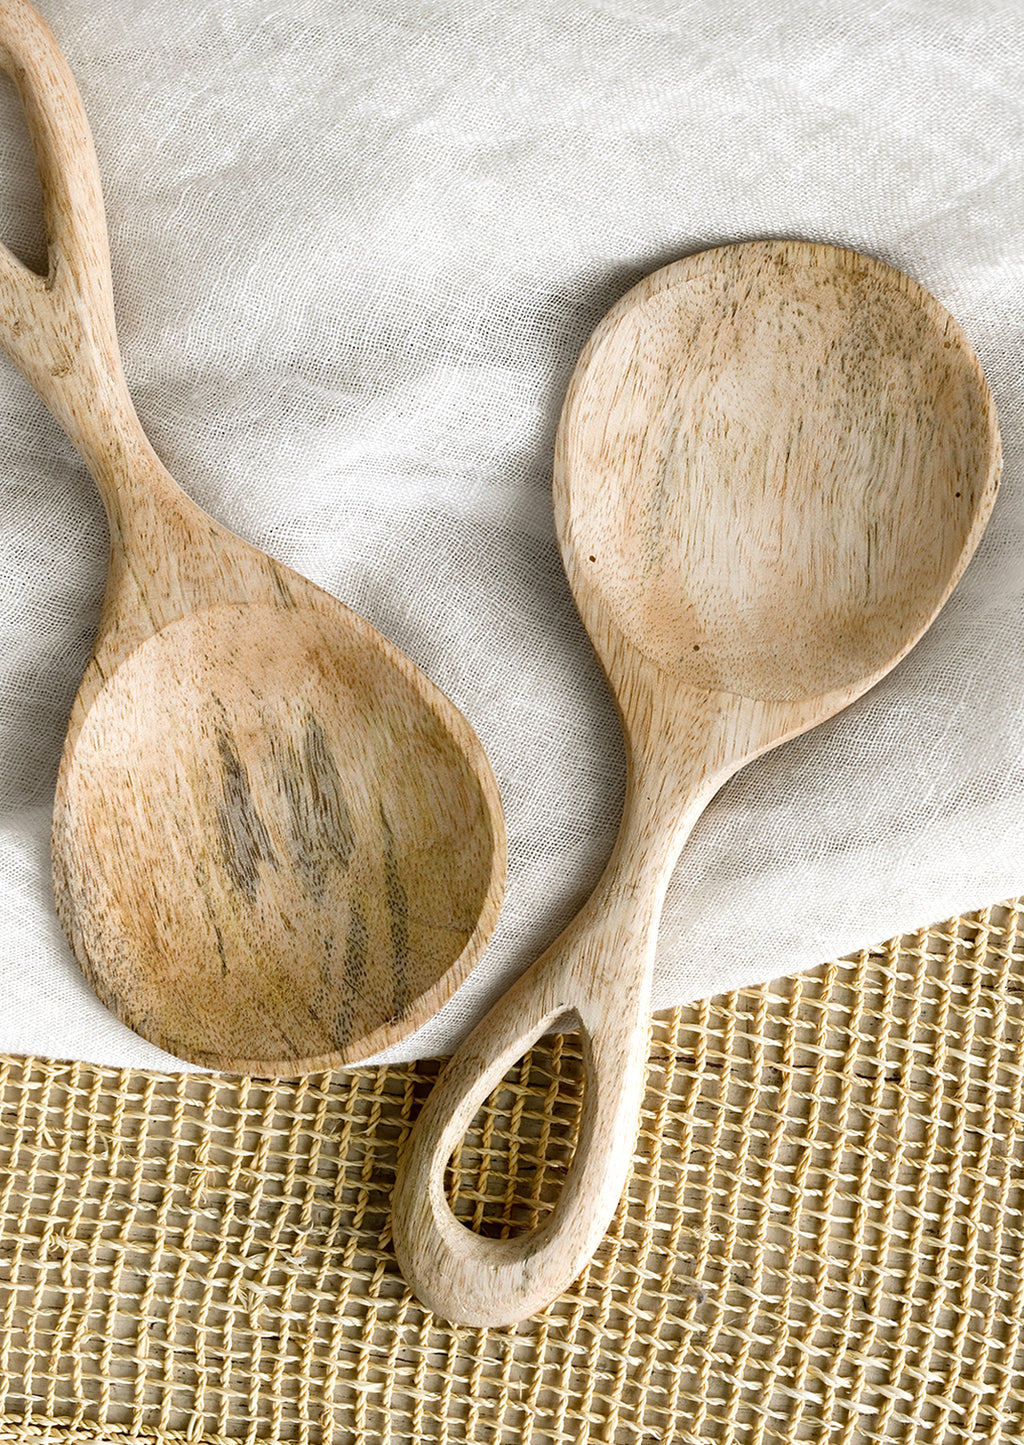 2: A wide paddle shaped spoon in light colored wood with loop handle.